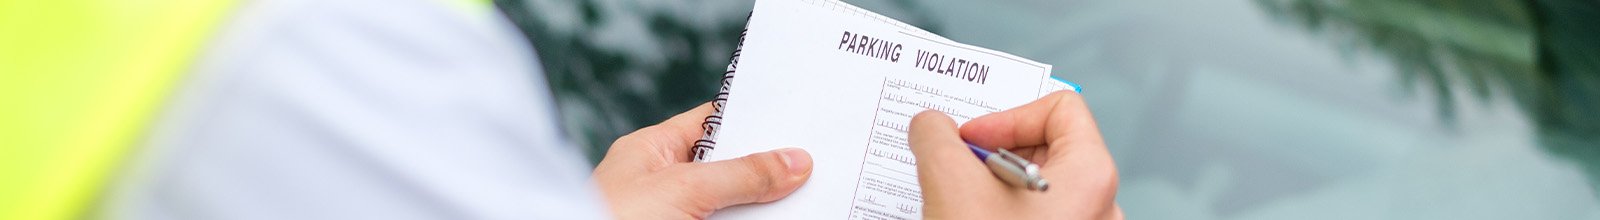 Photo of enforcement officer issuing a parking ticket